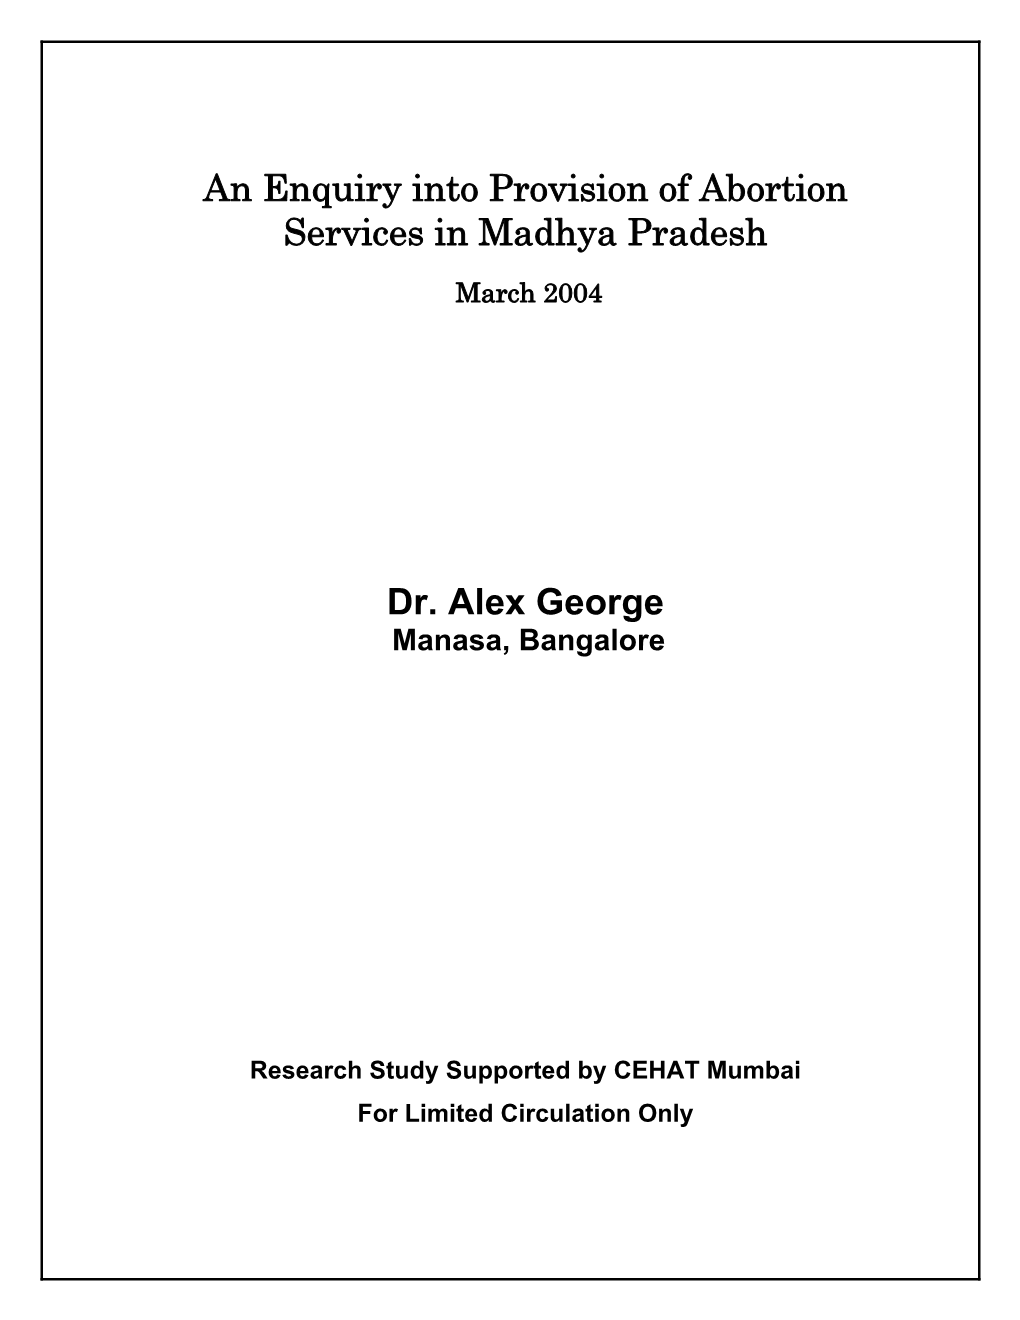 An Enquiry Into Provision of Abortion Services in Madhya Pradesh Dr